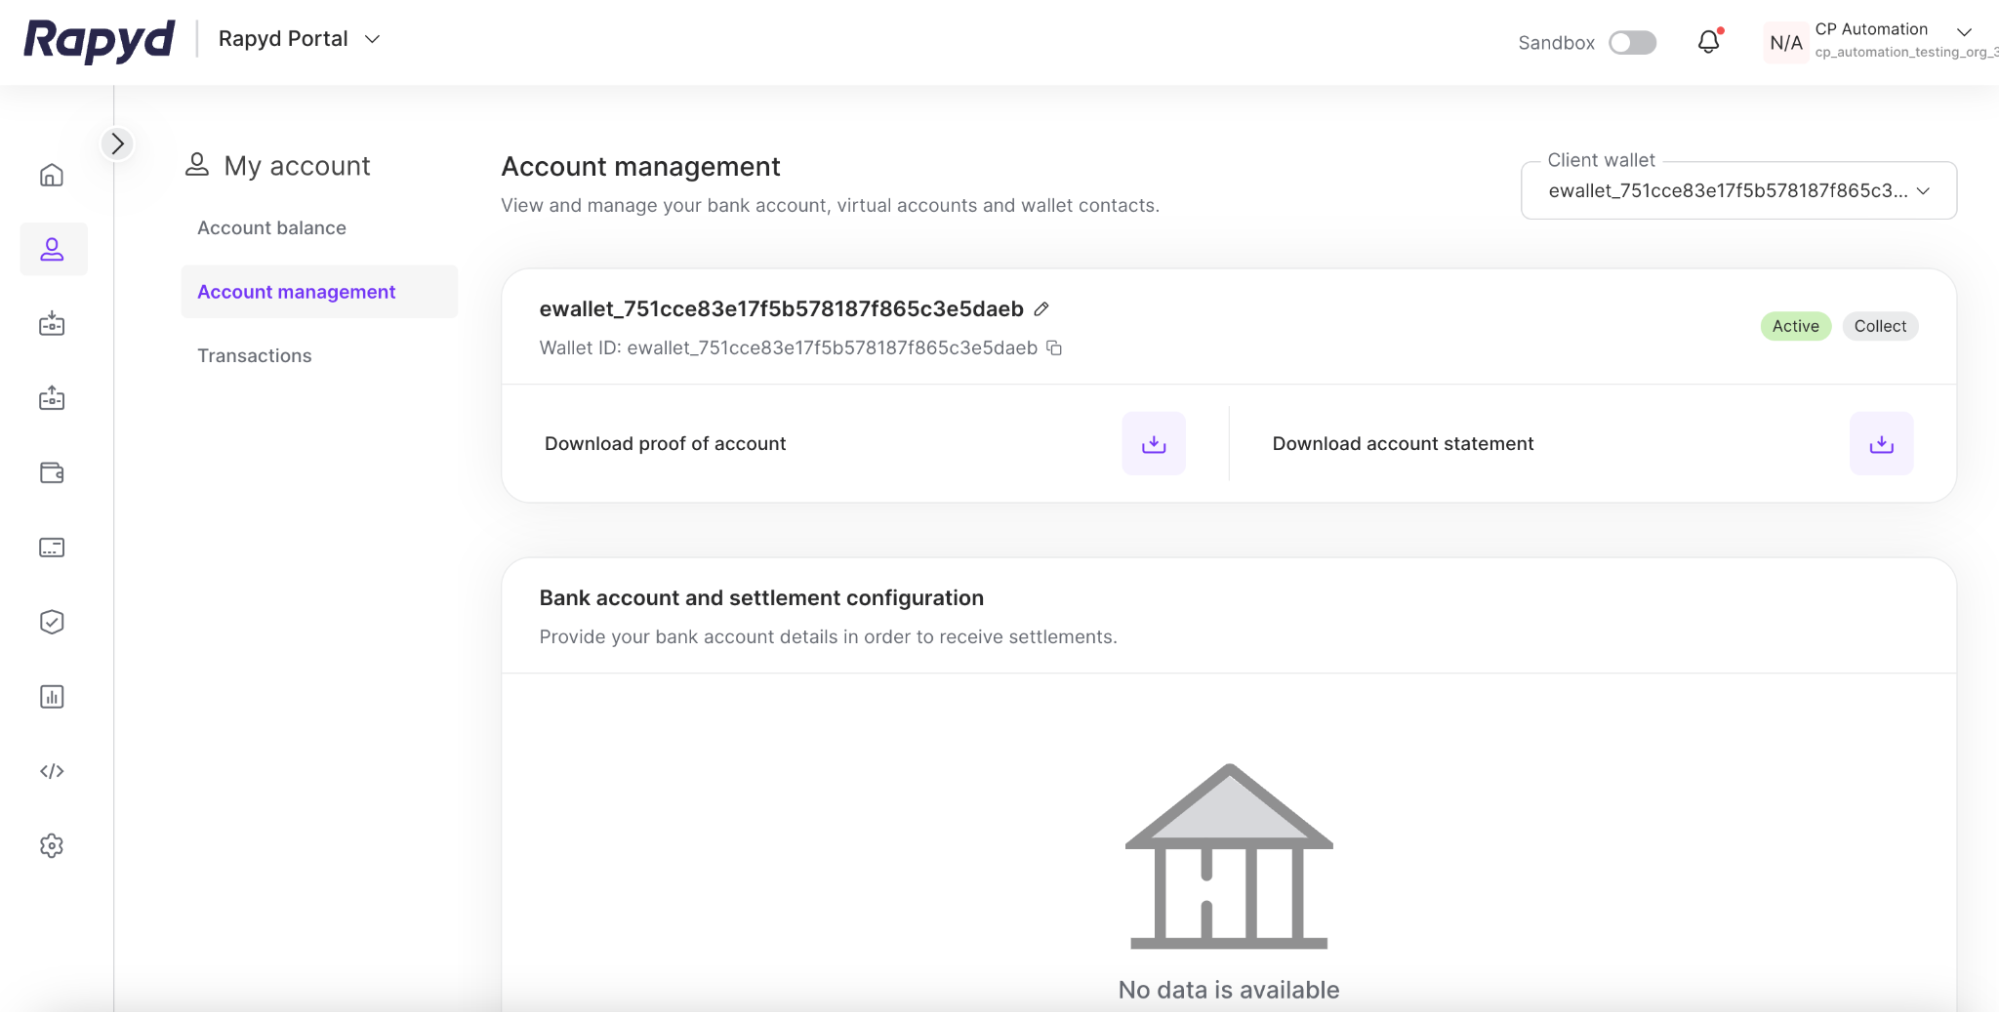 download-proof-of-account-flow-1.png